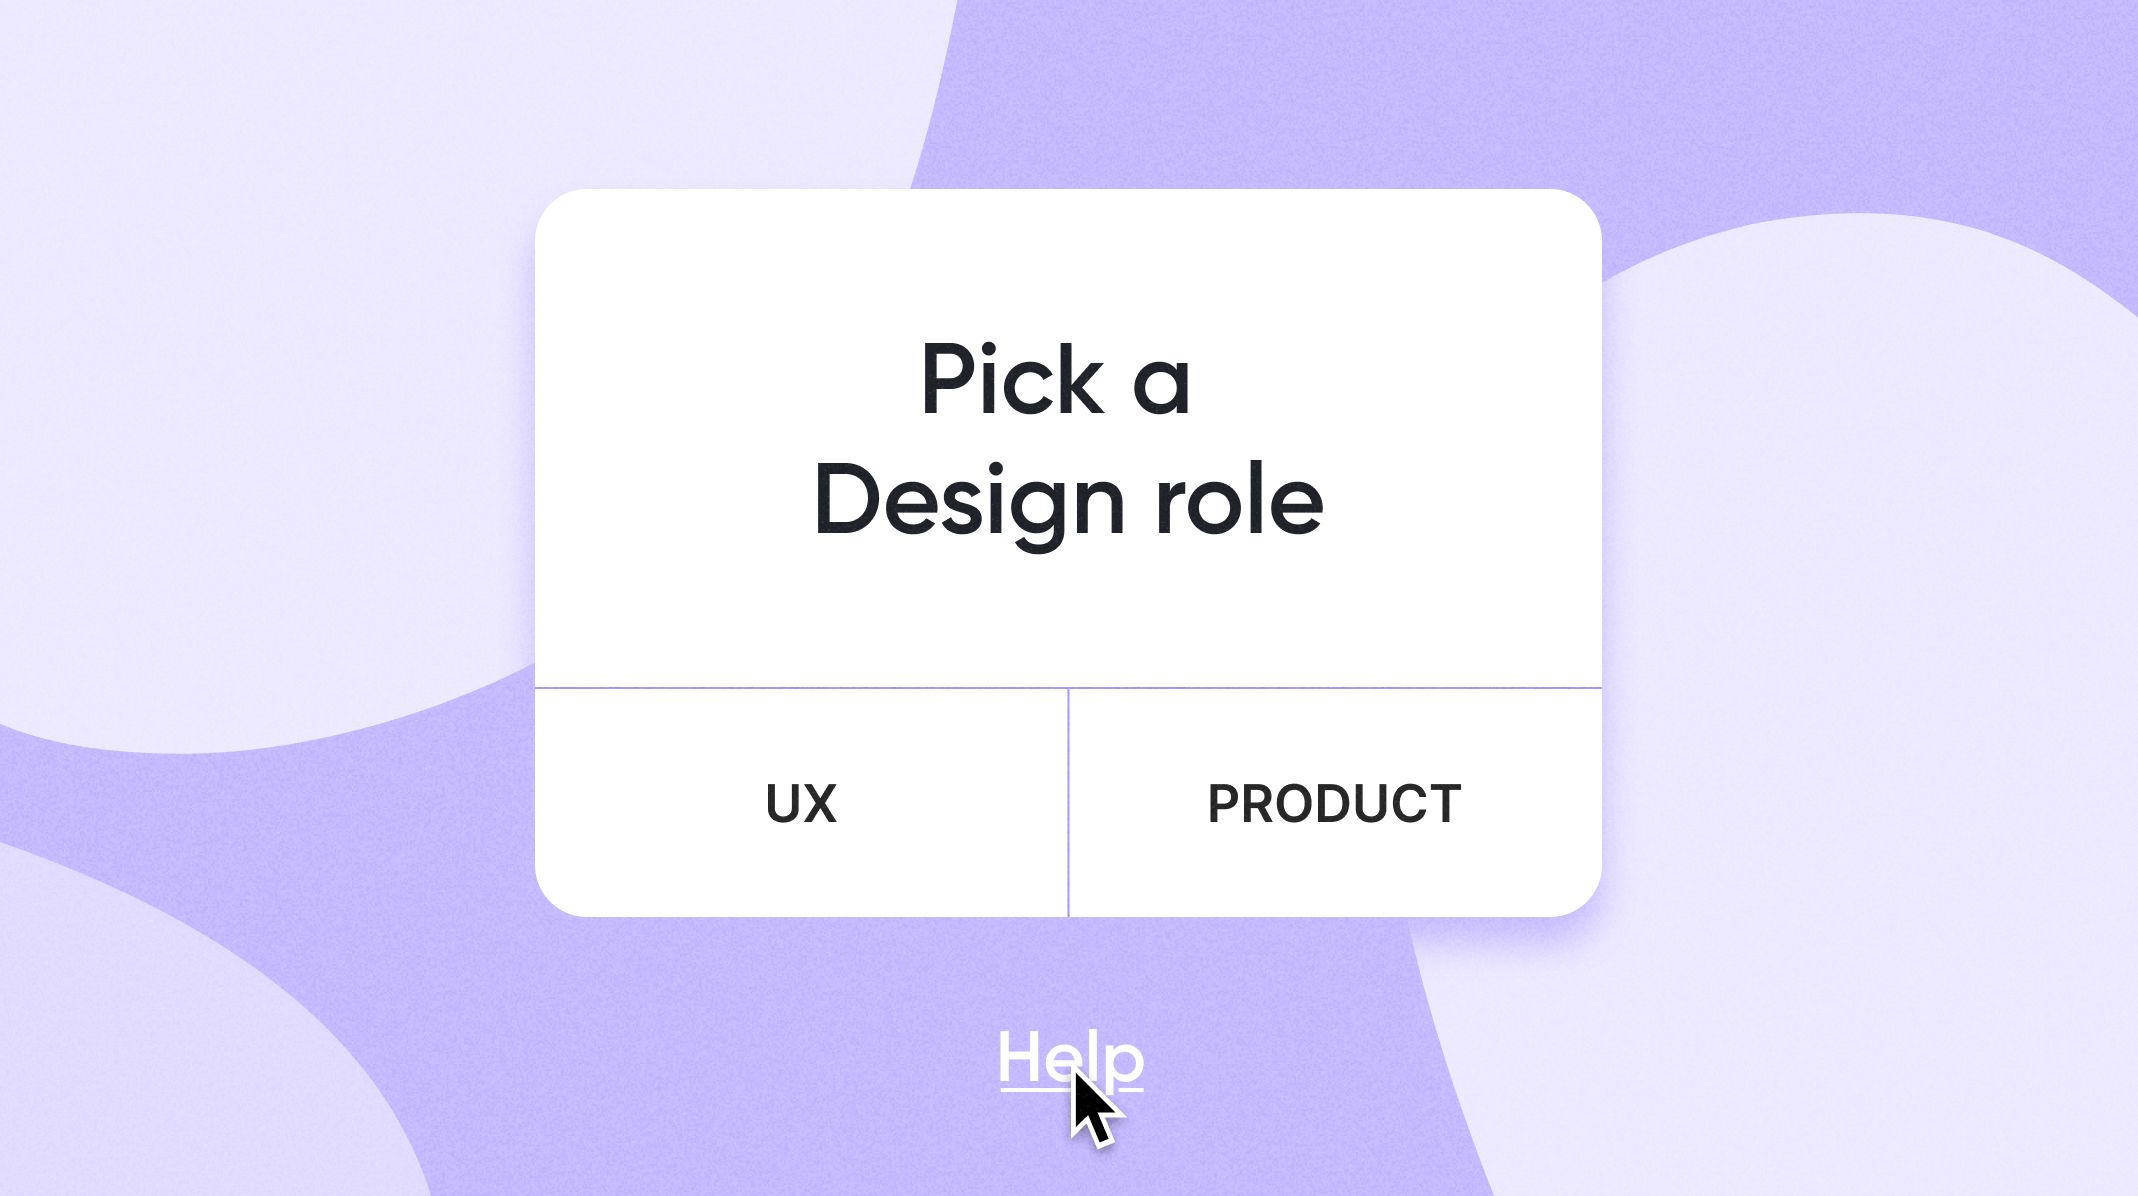 differences between ux and product design thumbnail